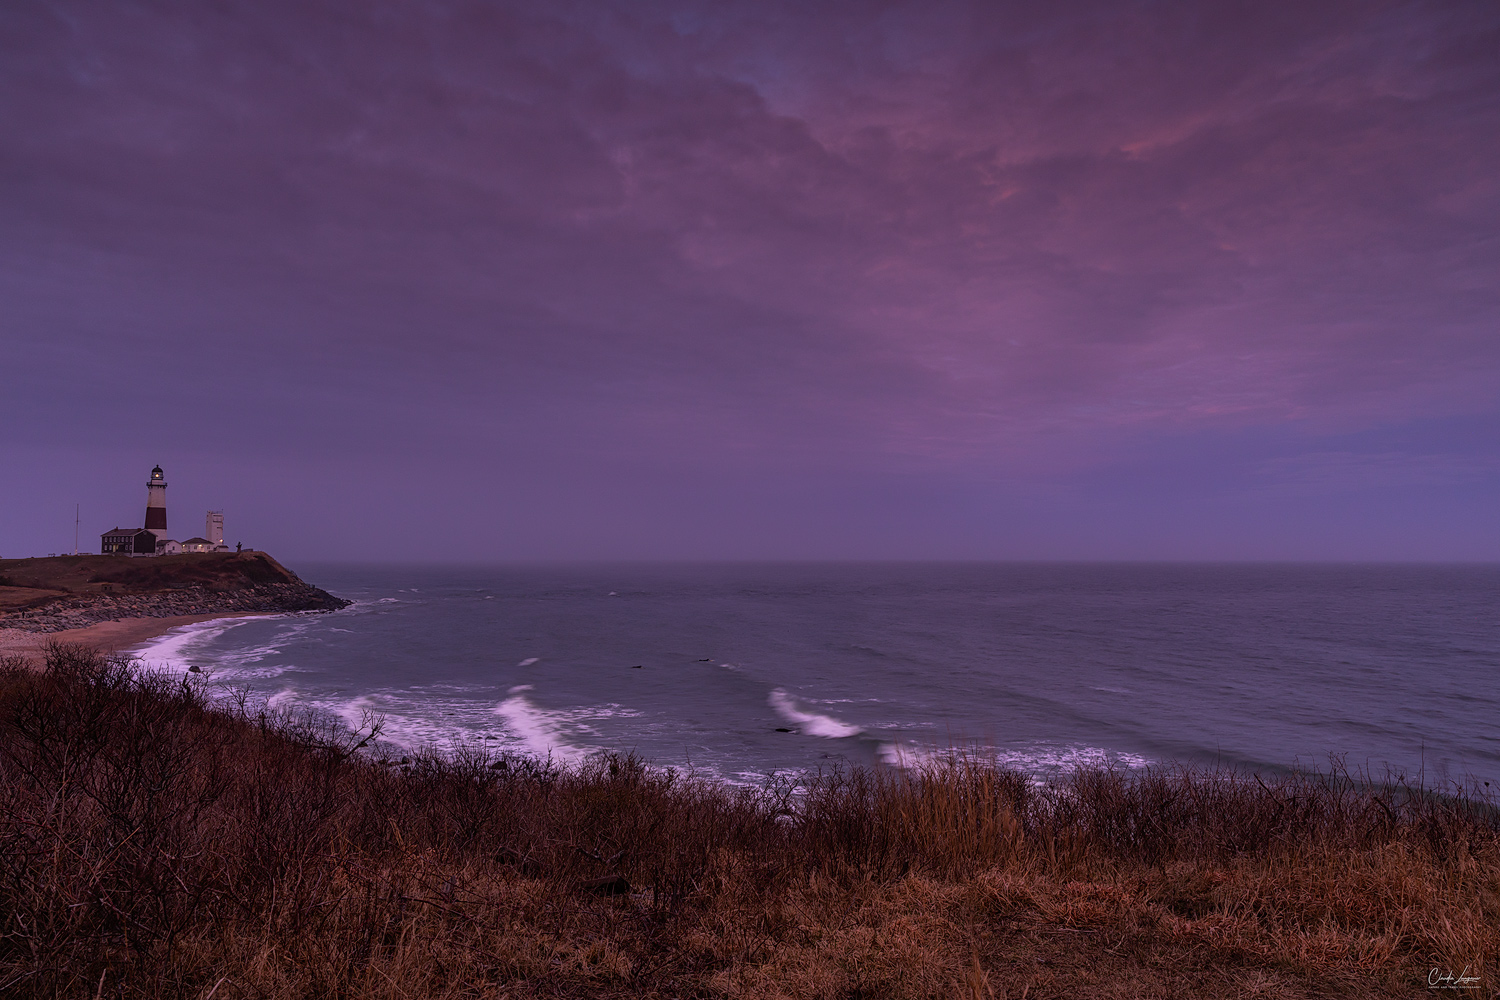 View of Montauk Point Lighthouse in New York at sunset.